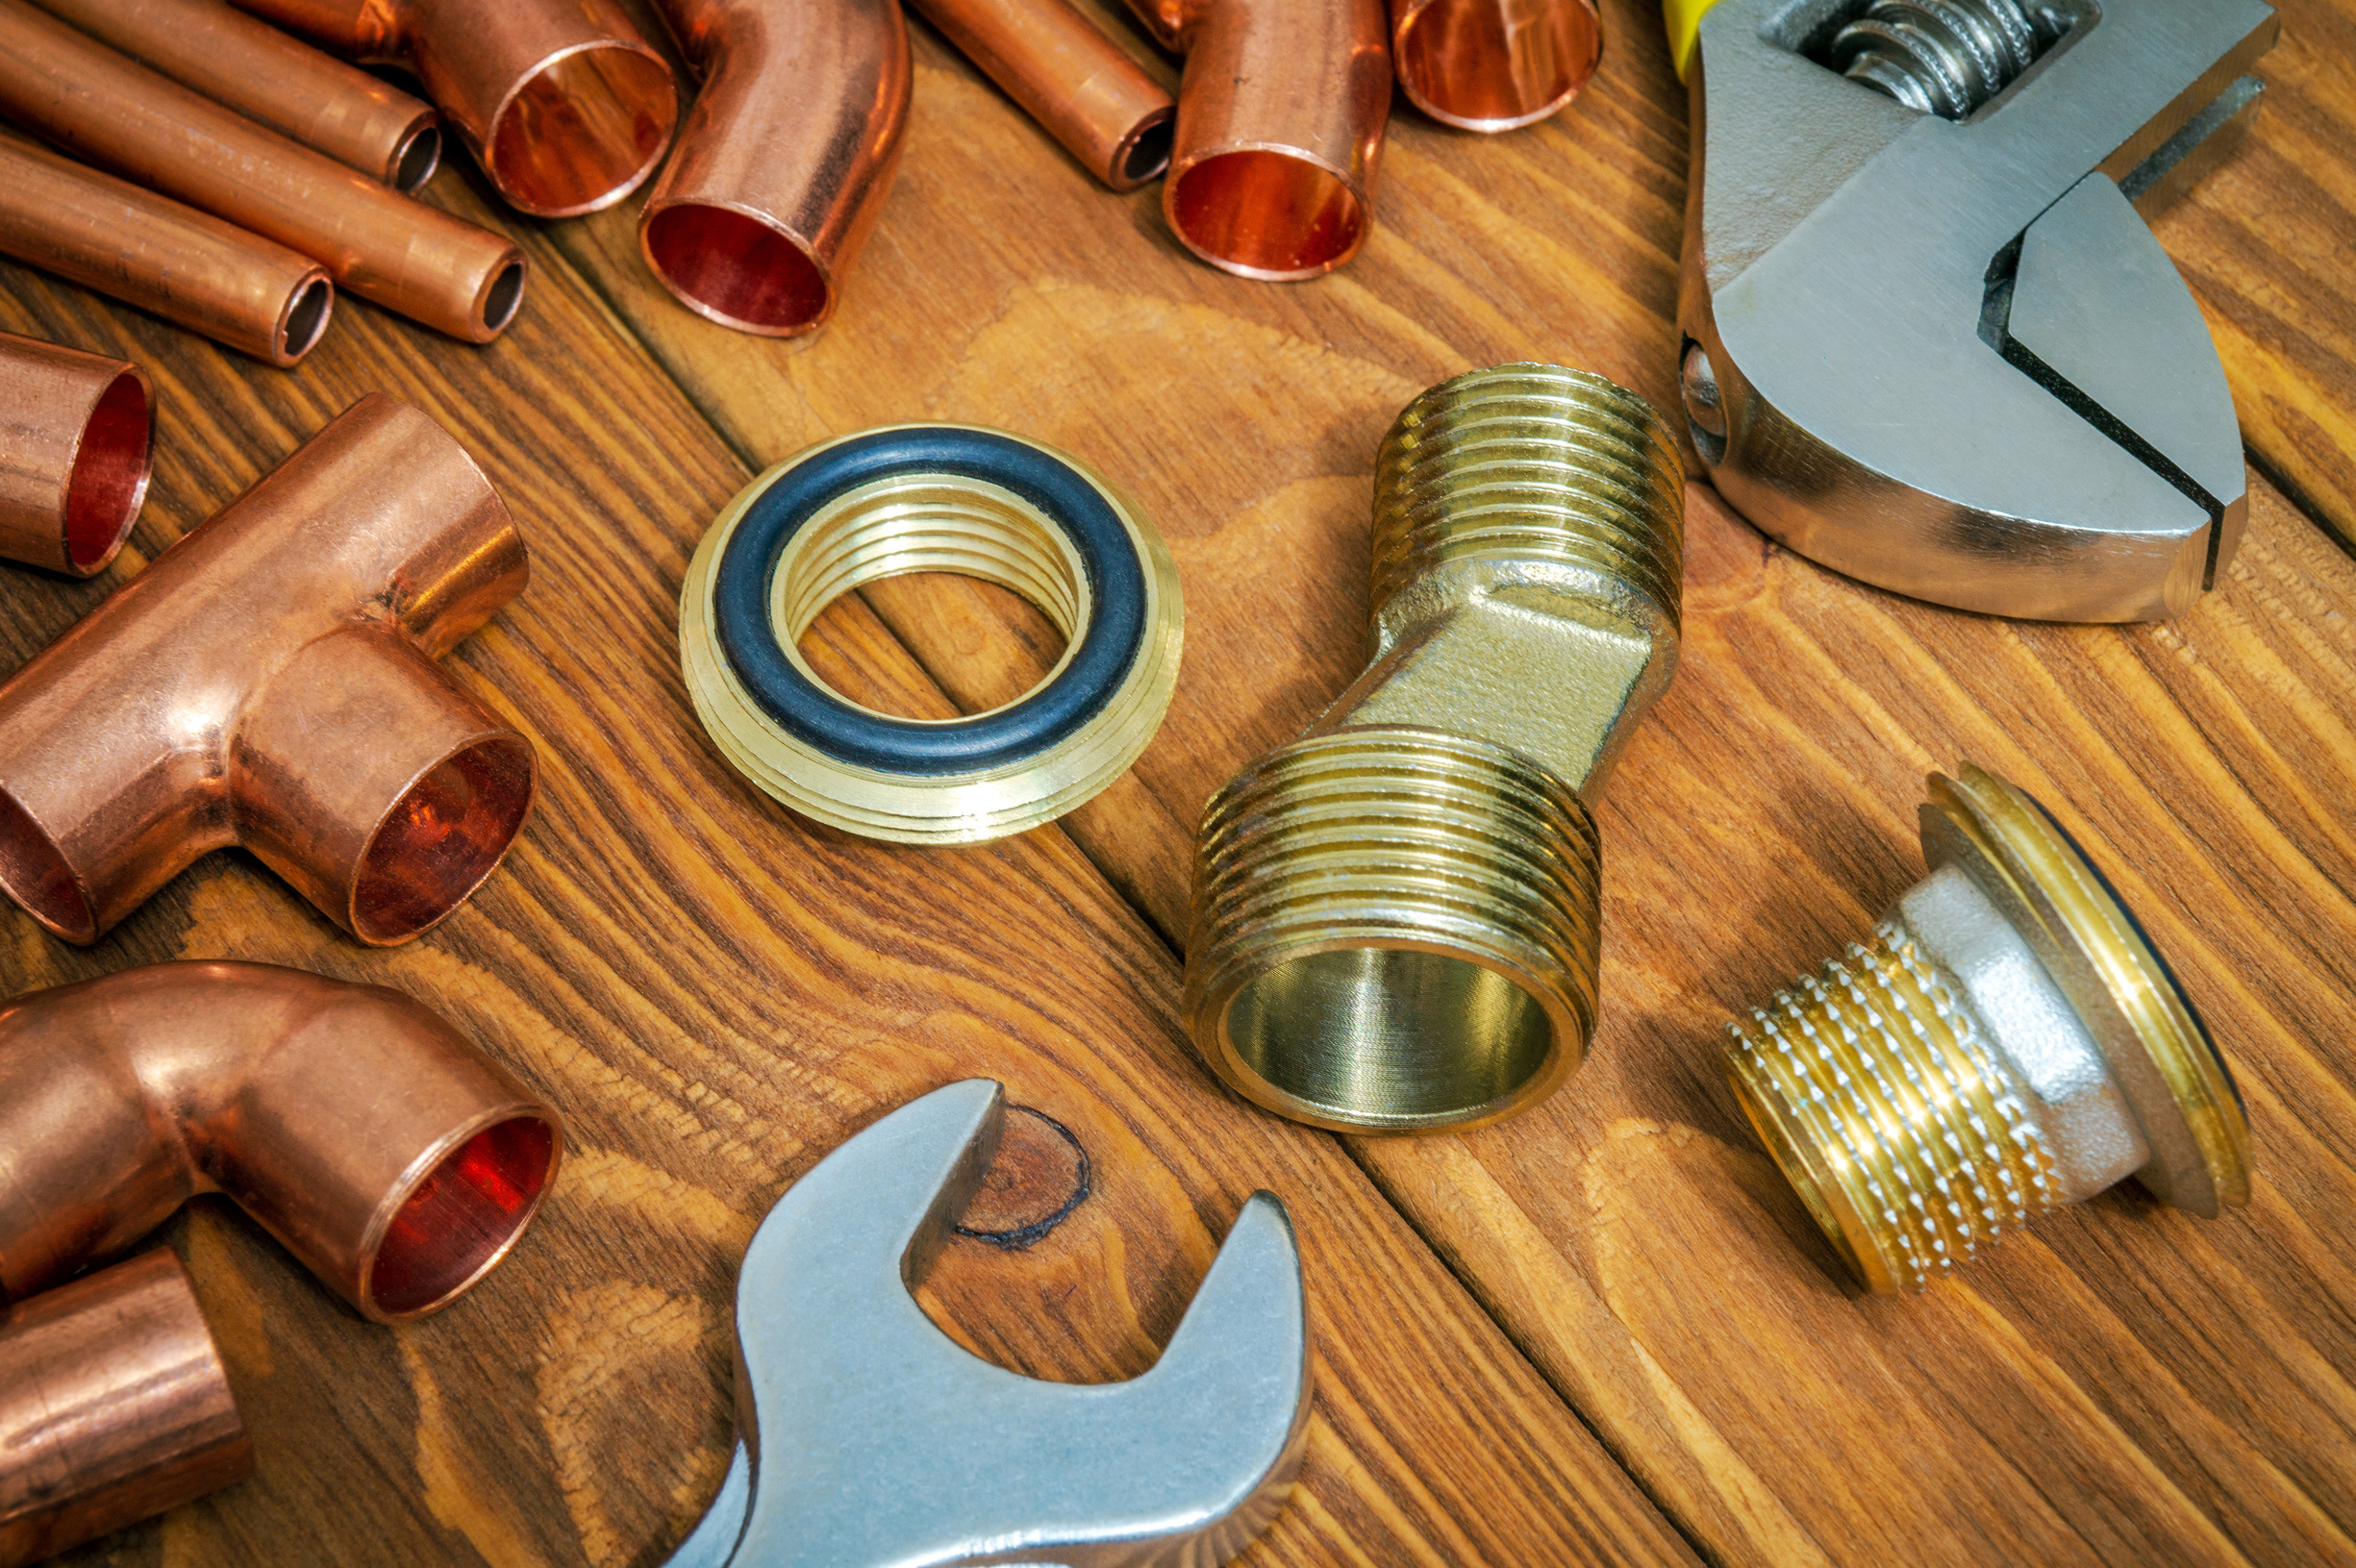 The spare parts with copper and brass accessories for plumbing repair on vintage wooden boards